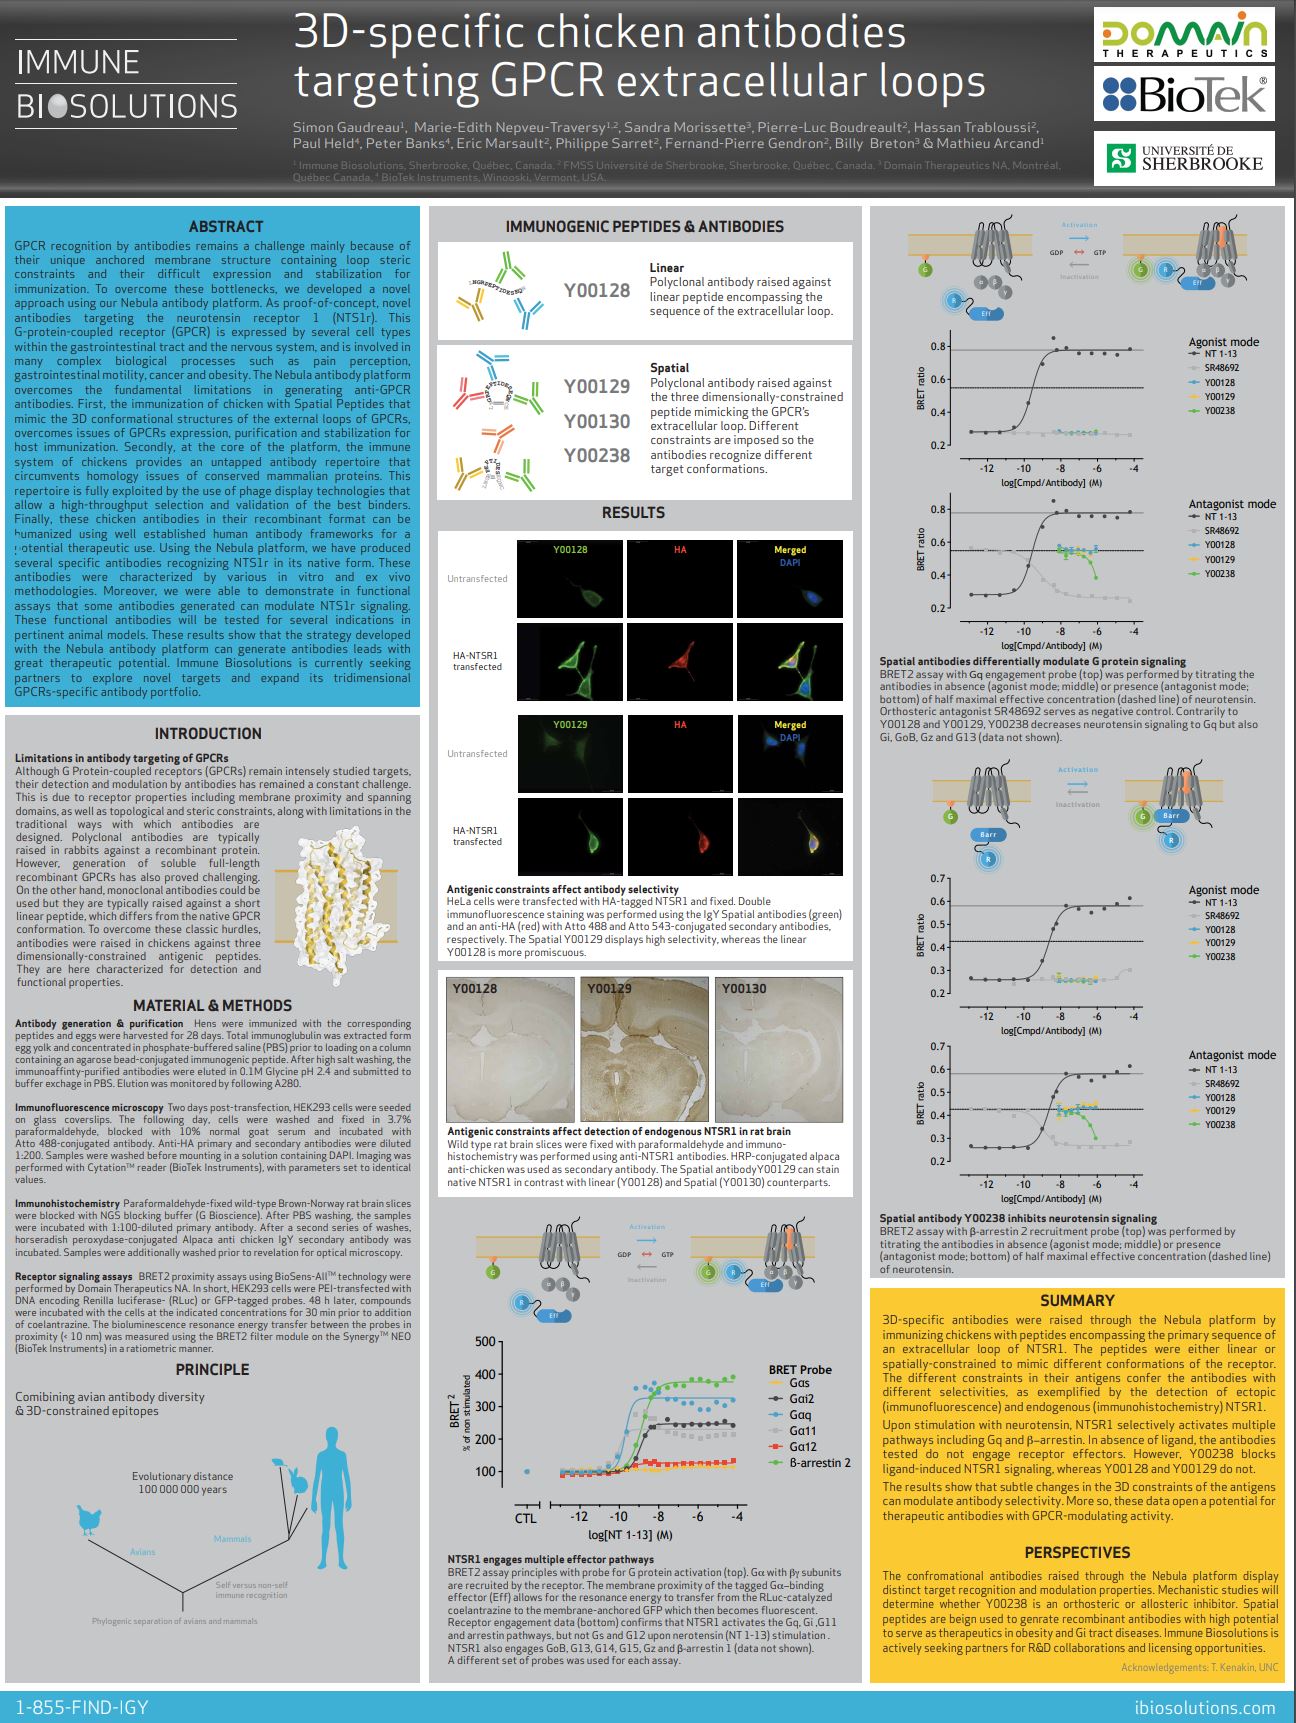 IBS 2016: 3D-specific chicken antibodies targeting GPCR extracellular loops